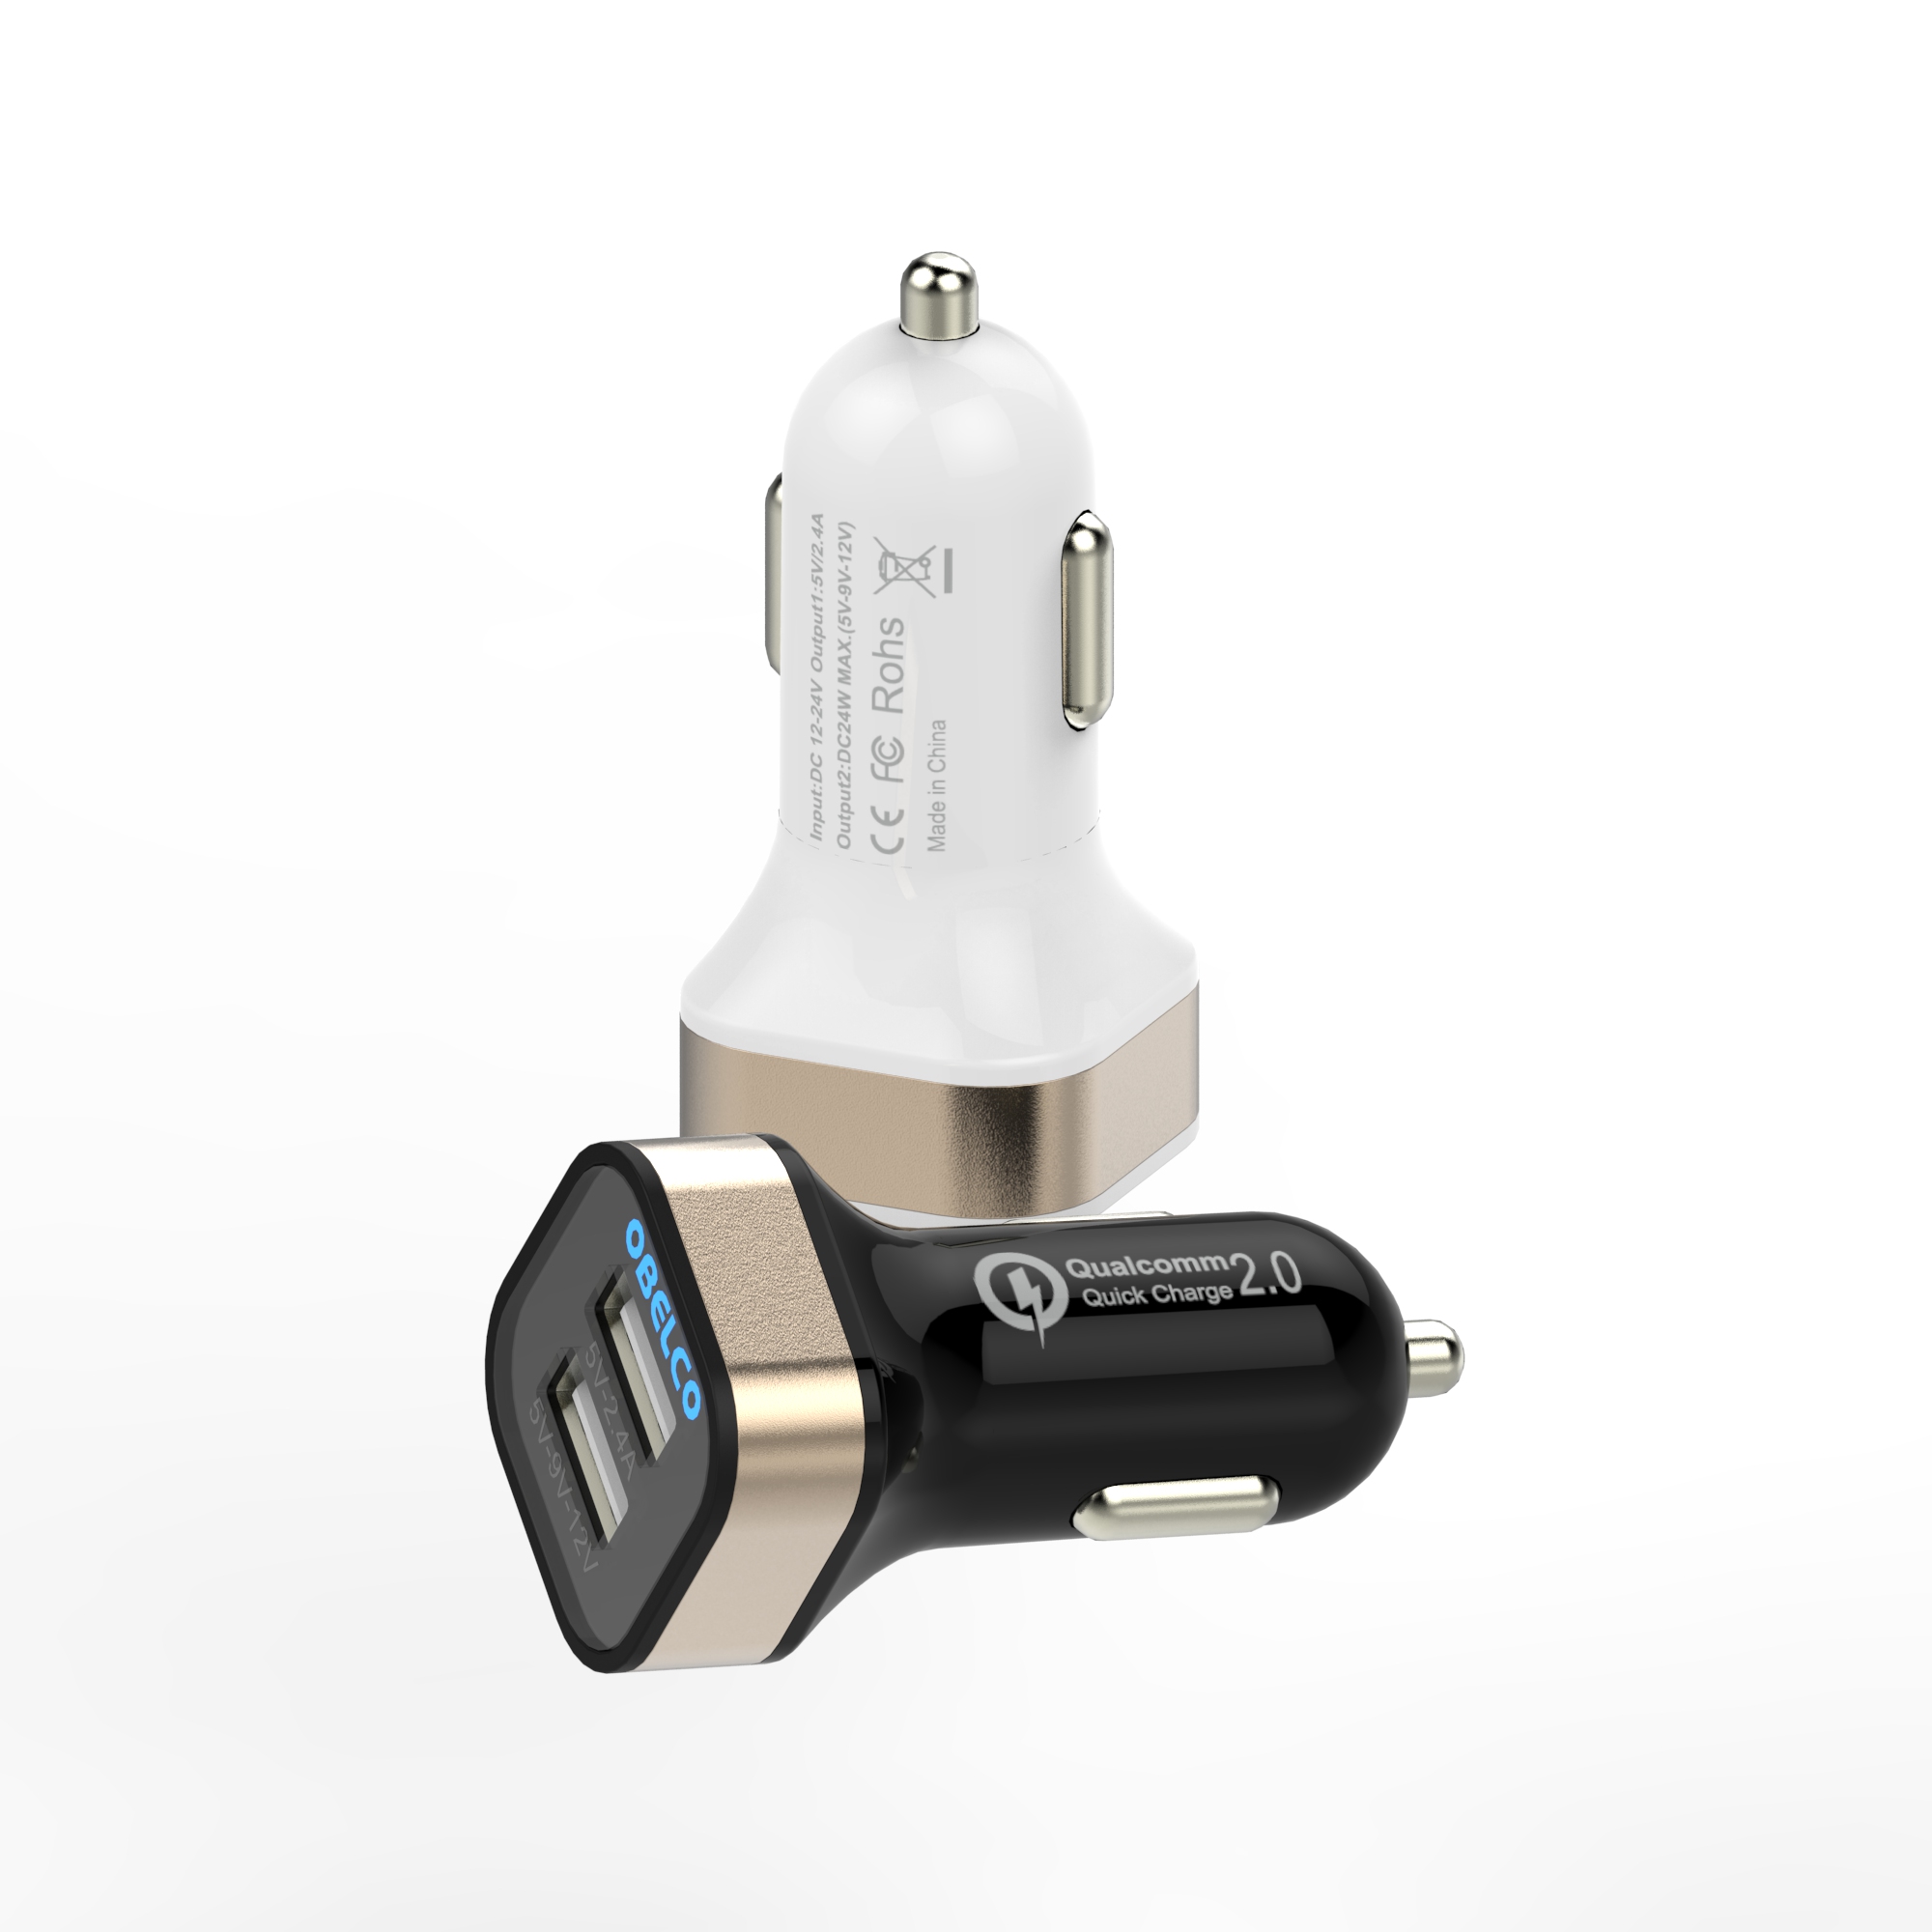 Car charger with QC2.0 Dual USB ports output